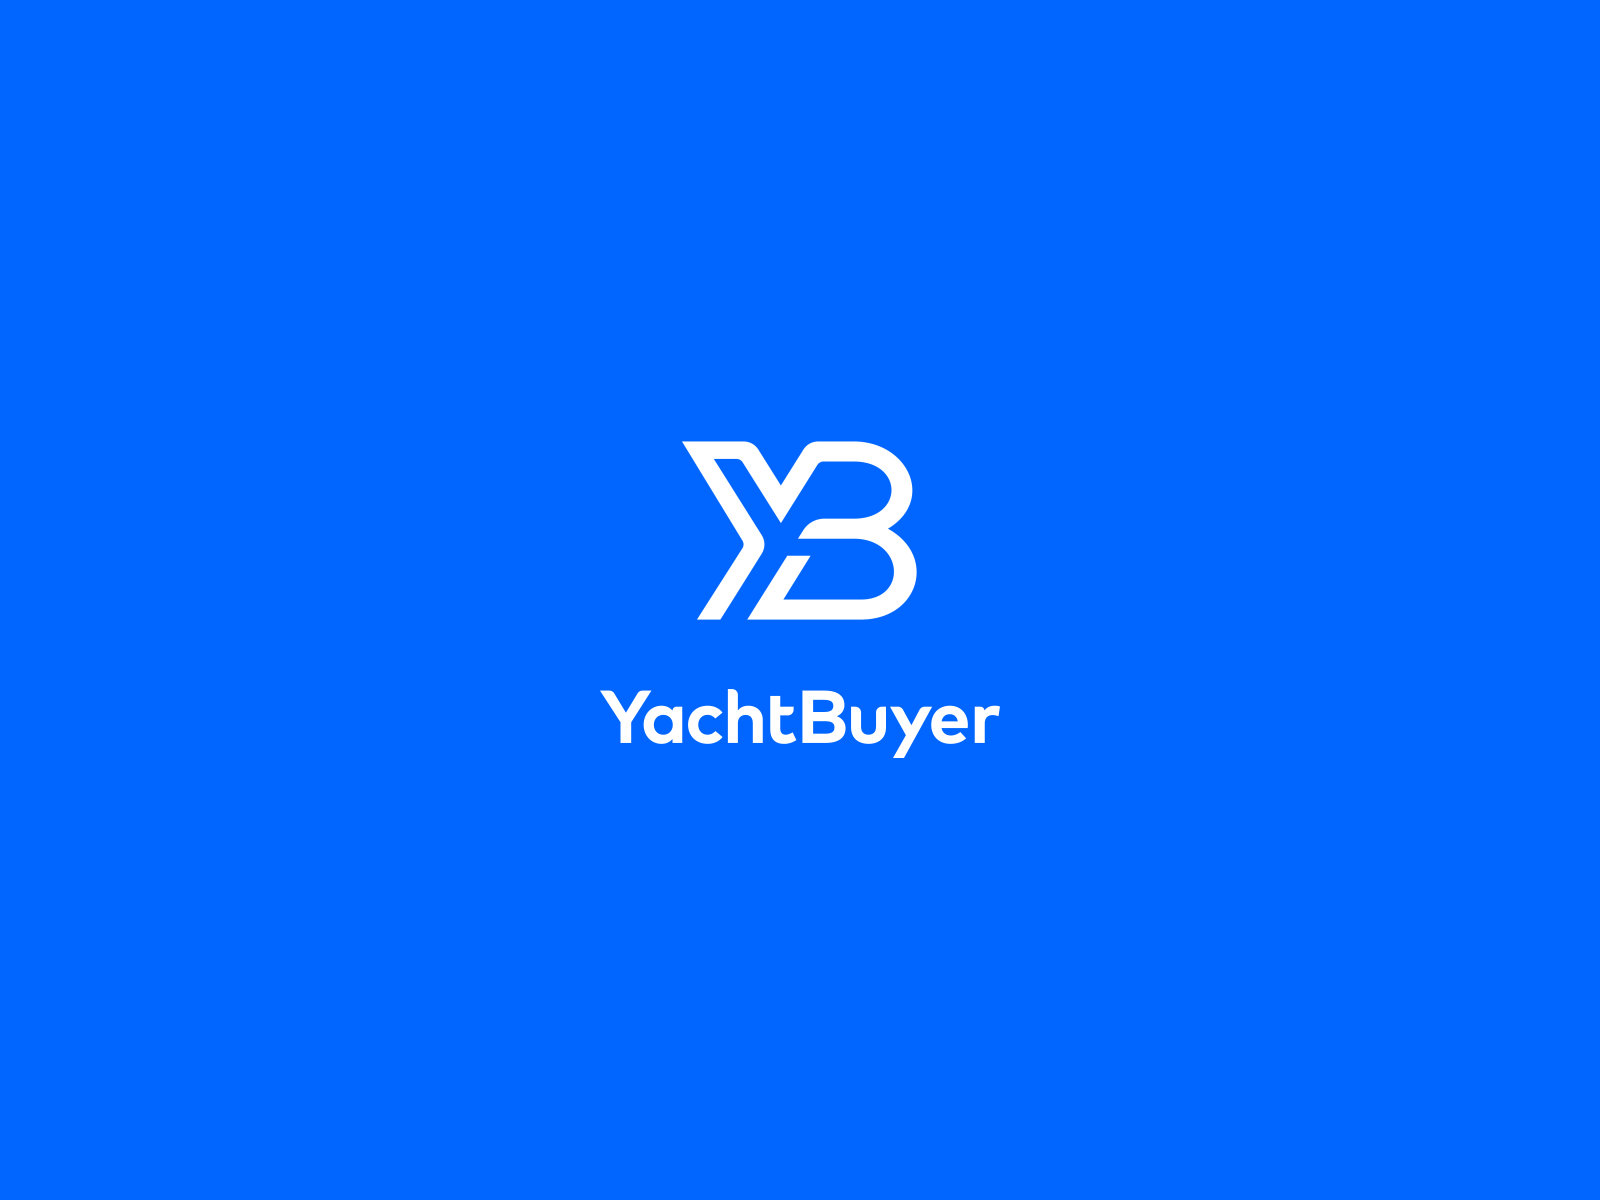 Yacht Buyer Animation animation design flat graphic graphic design icon illustration logo loop mark motion motion graphics vector water wave yb